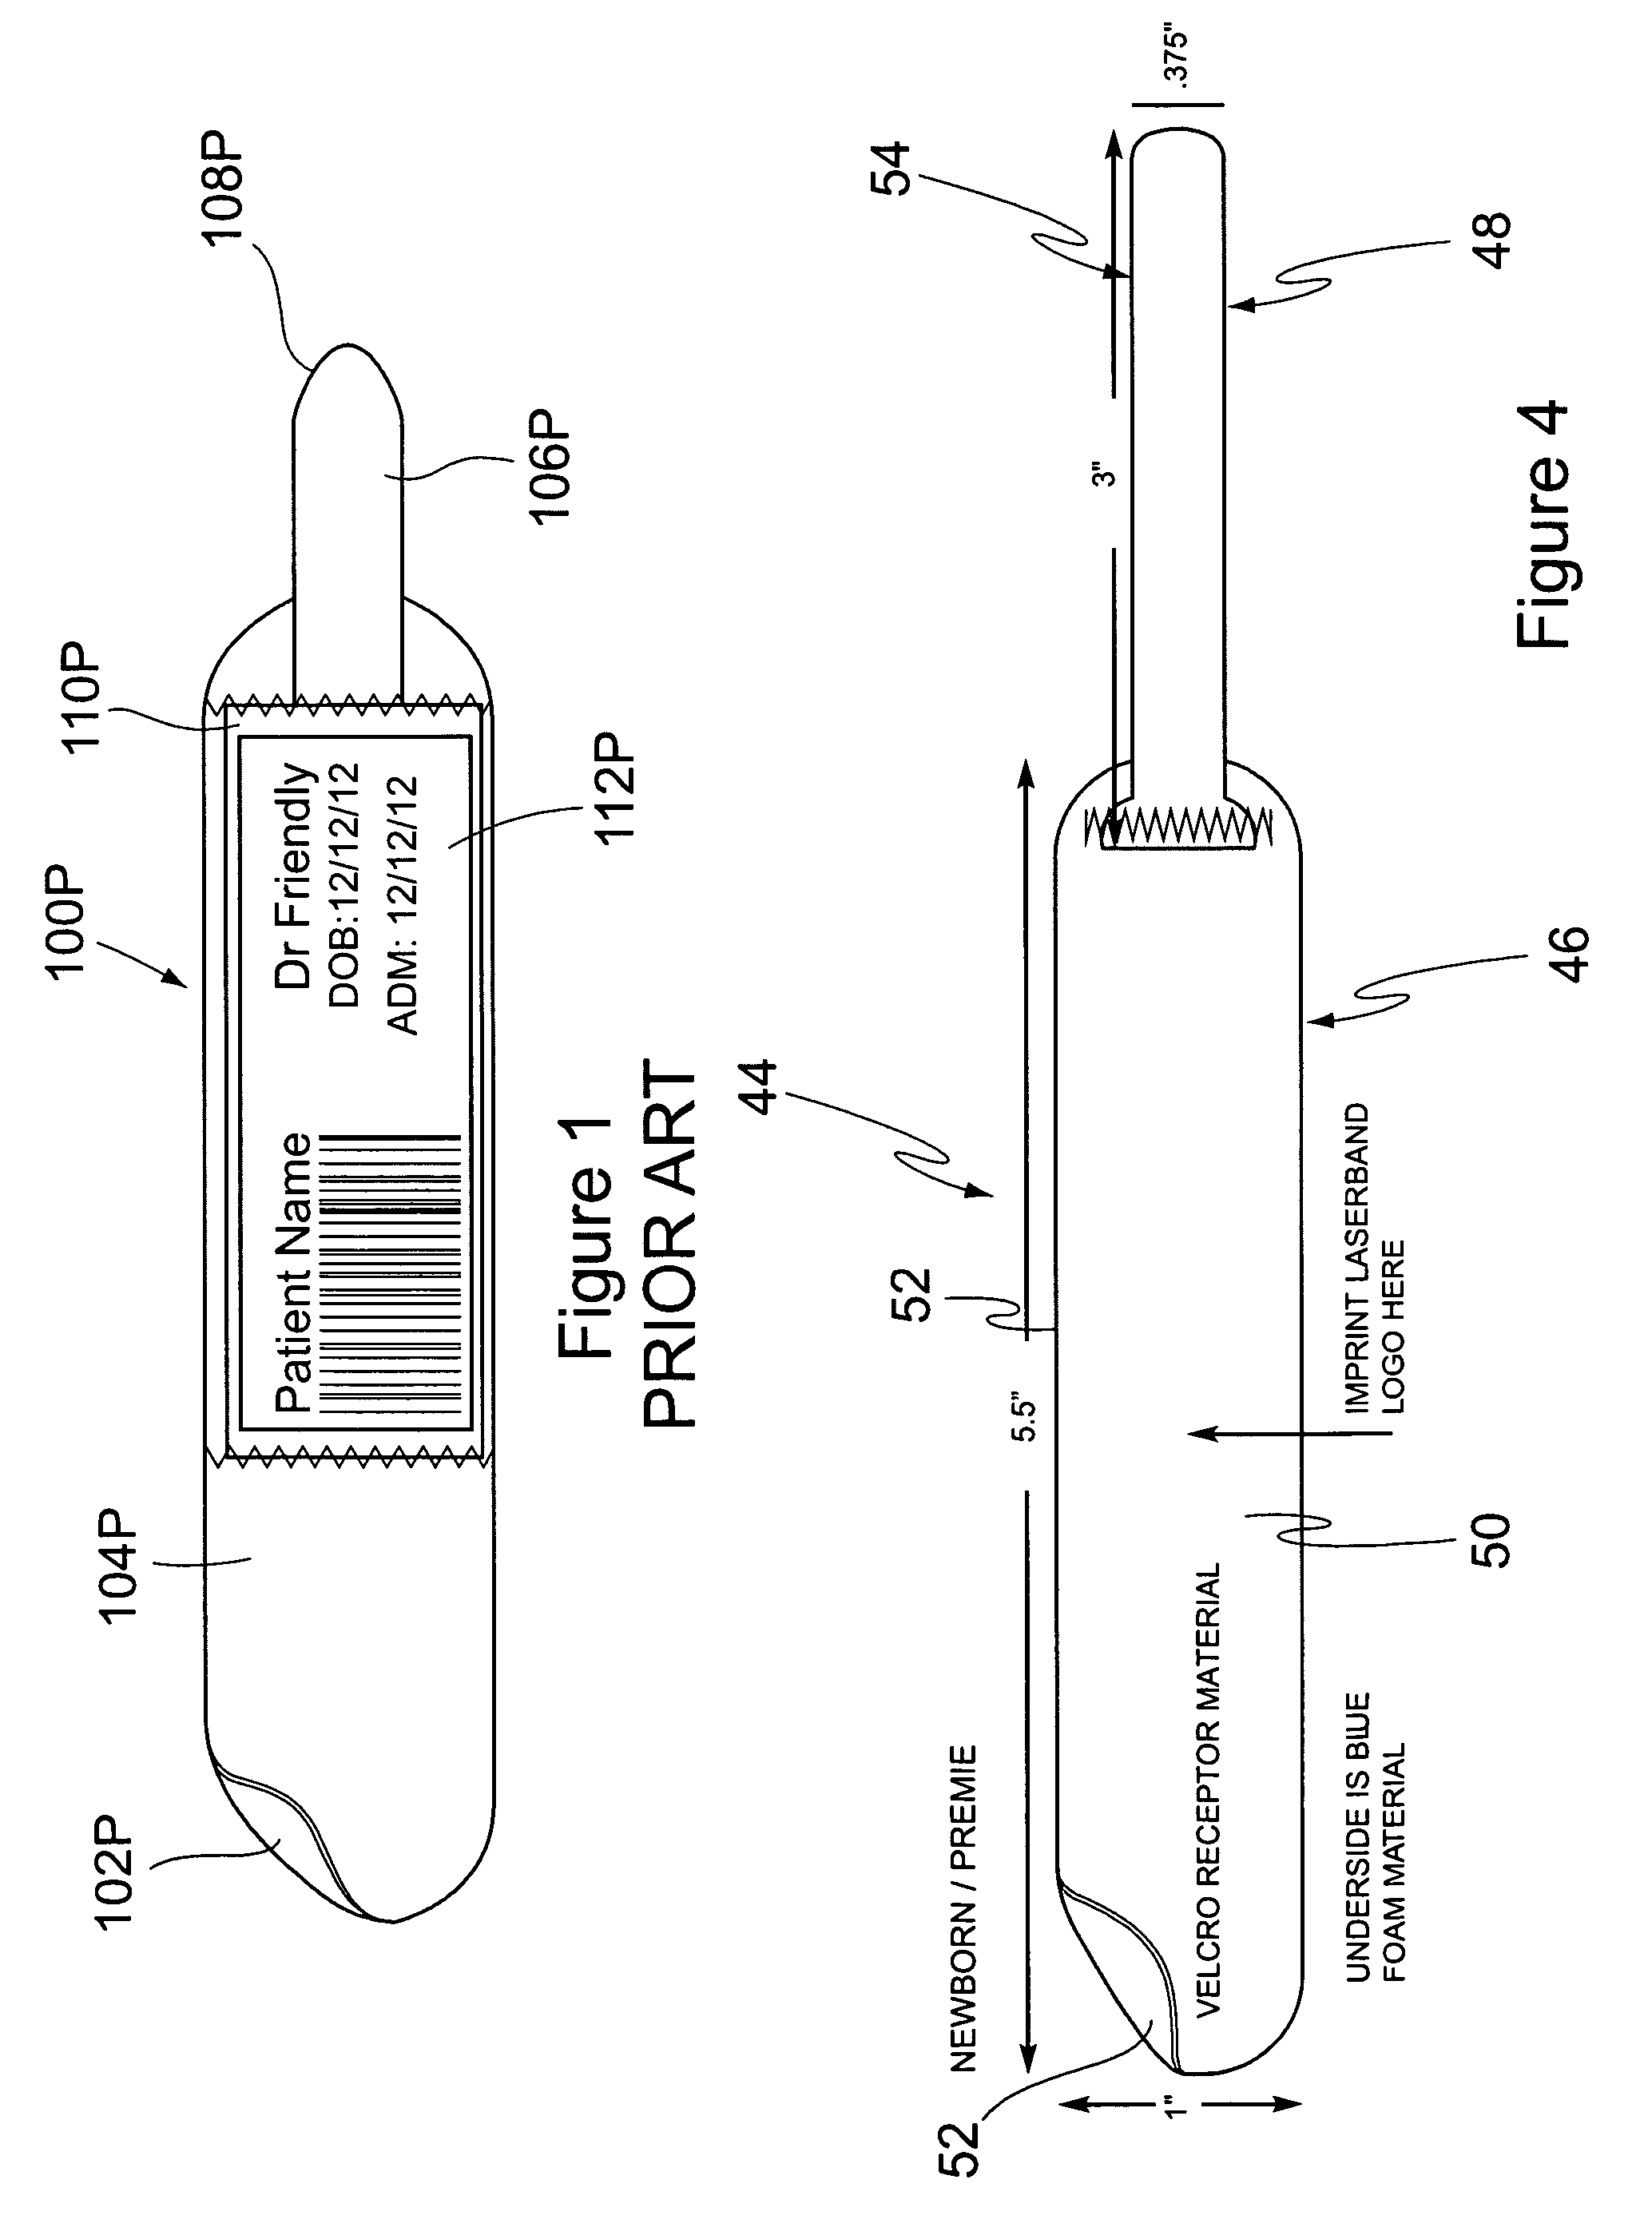 Cushioned wristband with self-laminating identity tag and adhesive patch